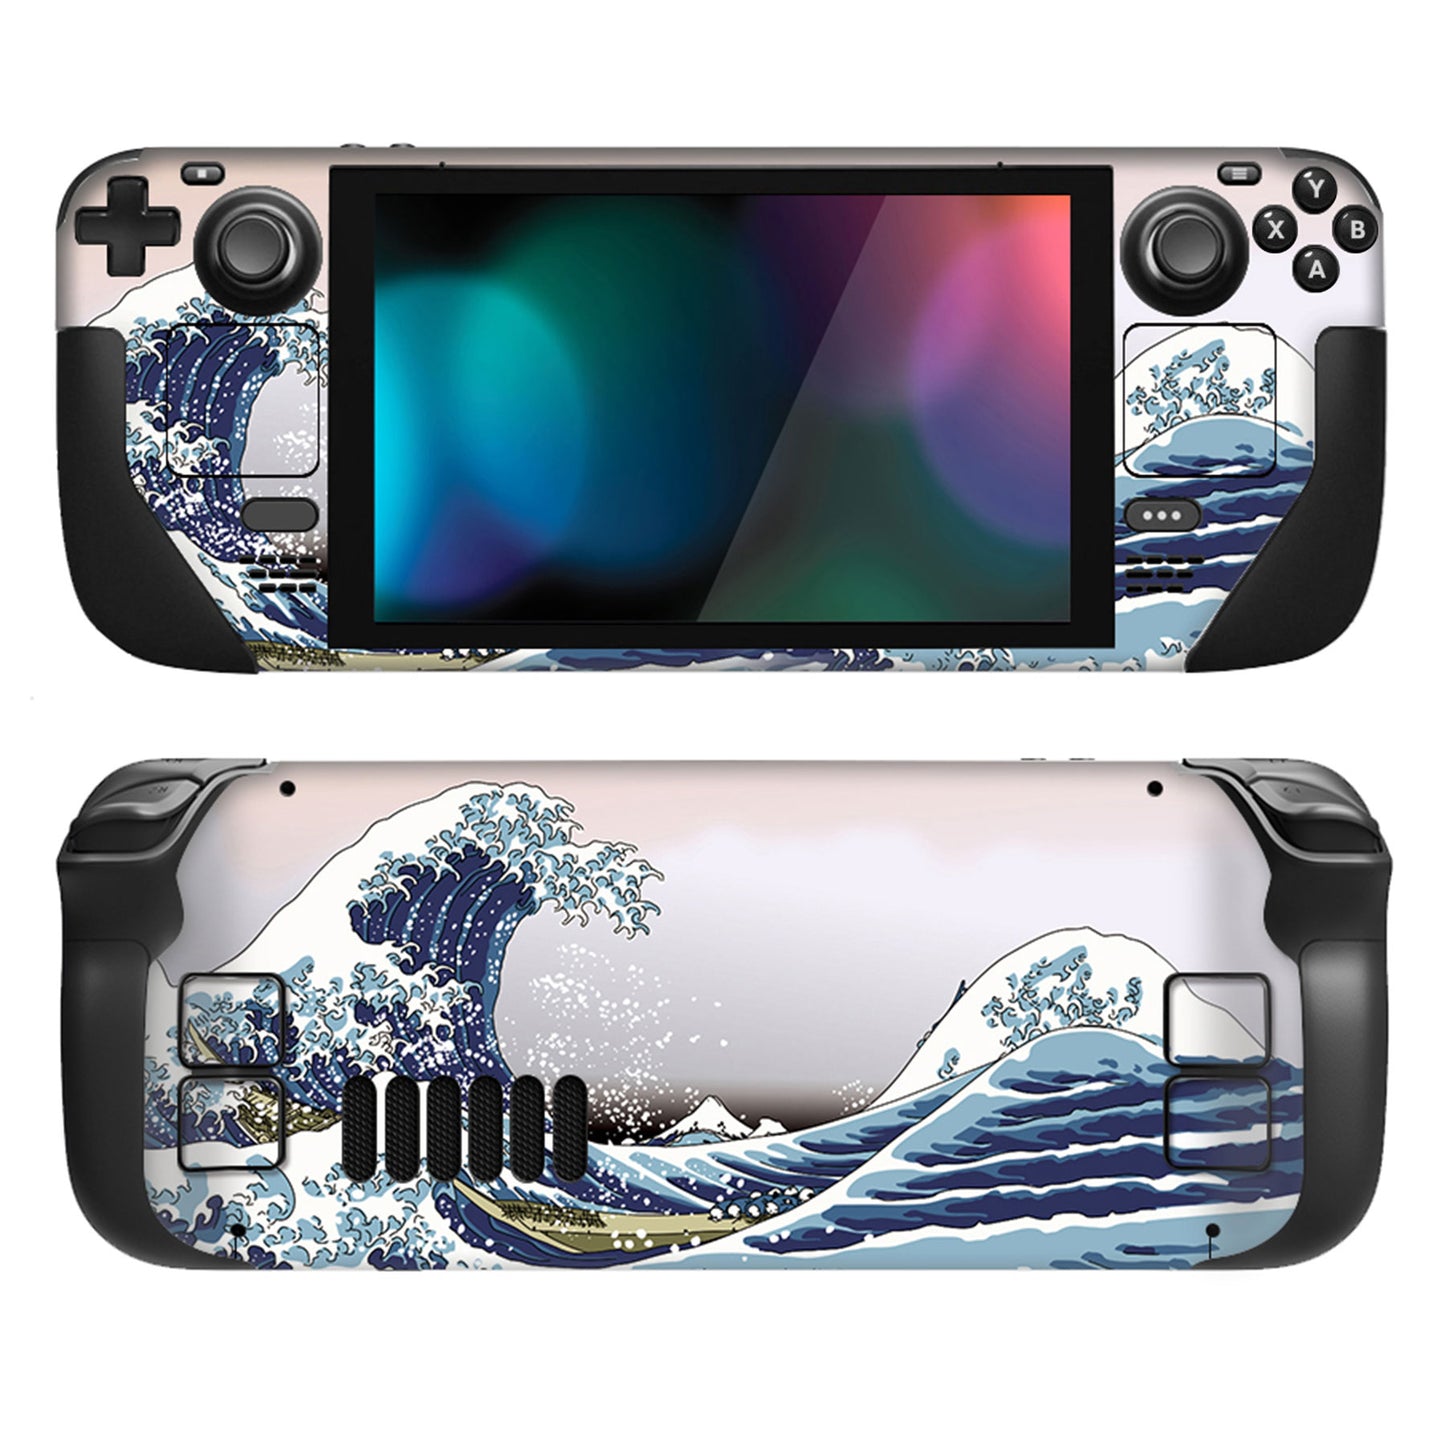 PlayVital Full Set Protective Skin Decal for Steam Deck, Custom Stickers Vinyl Cover for Steam Deck Handheld Gaming PC - The Great Wave - SDTM008 playvital